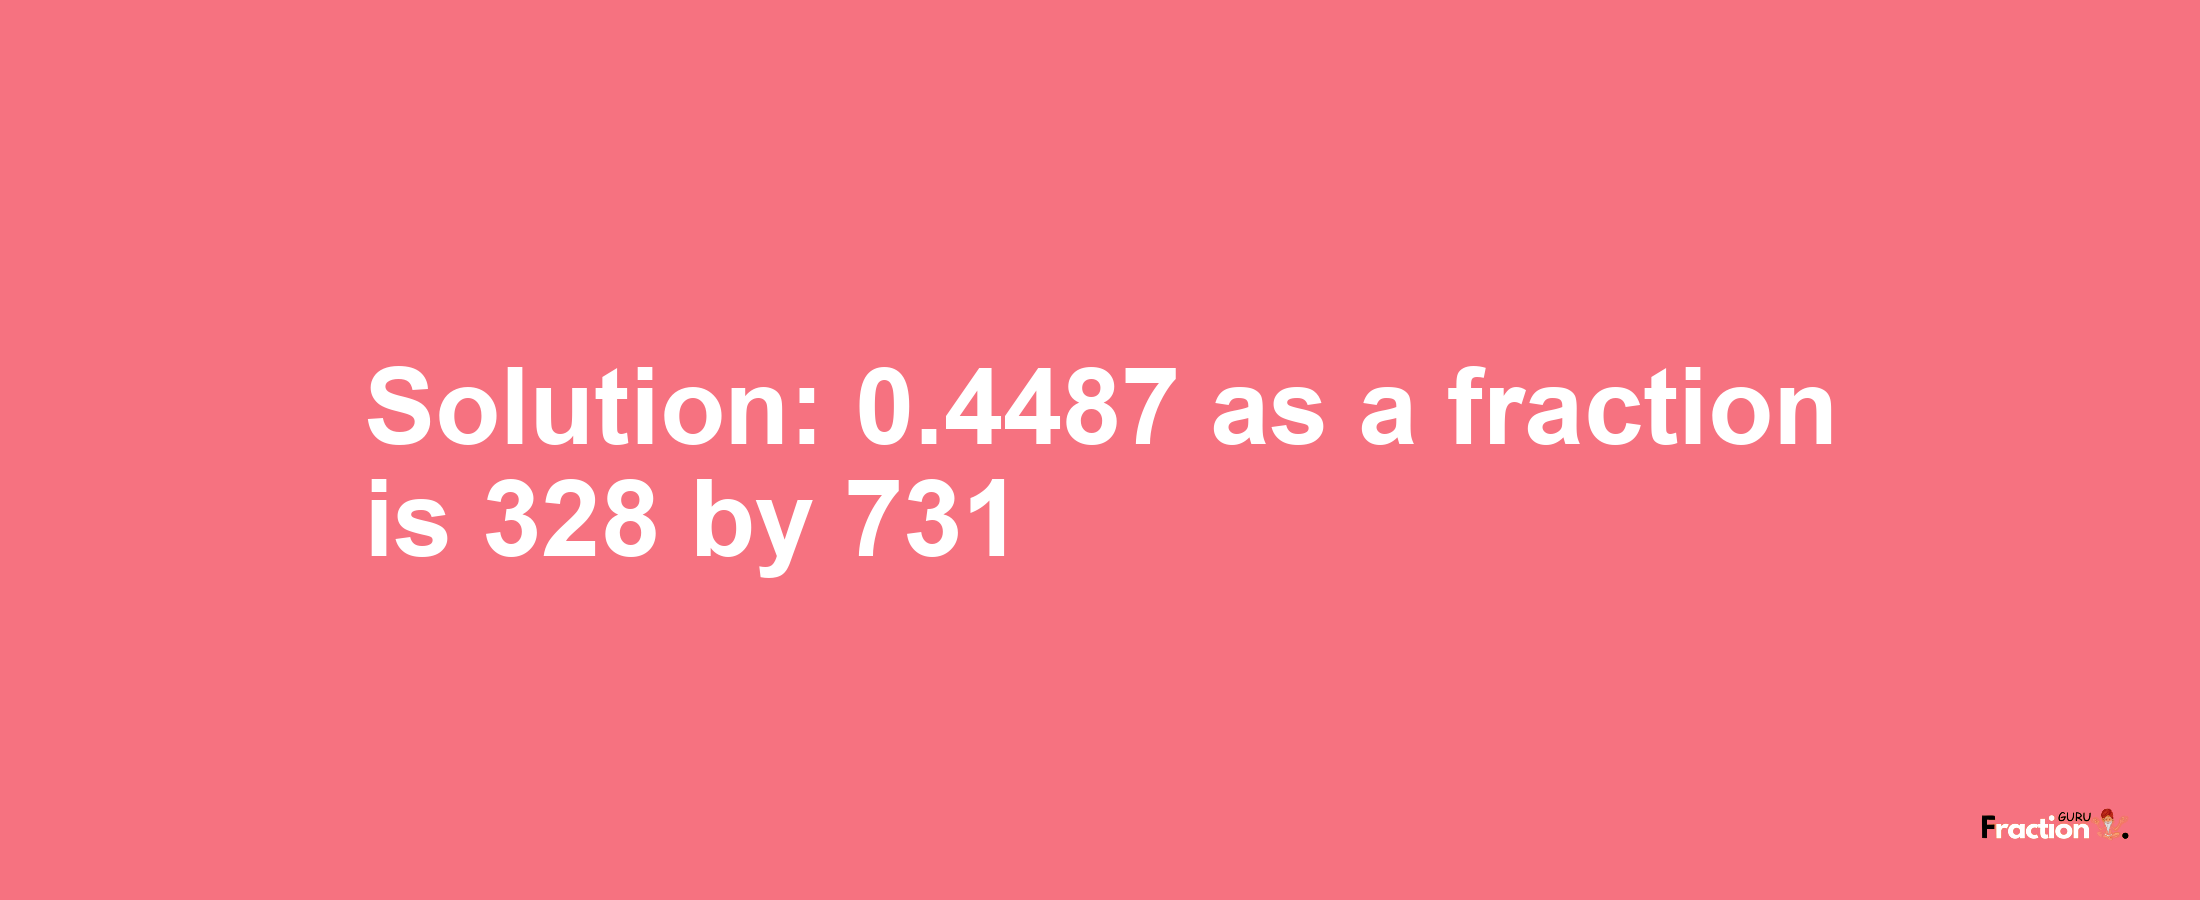 Solution:0.4487 as a fraction is 328/731